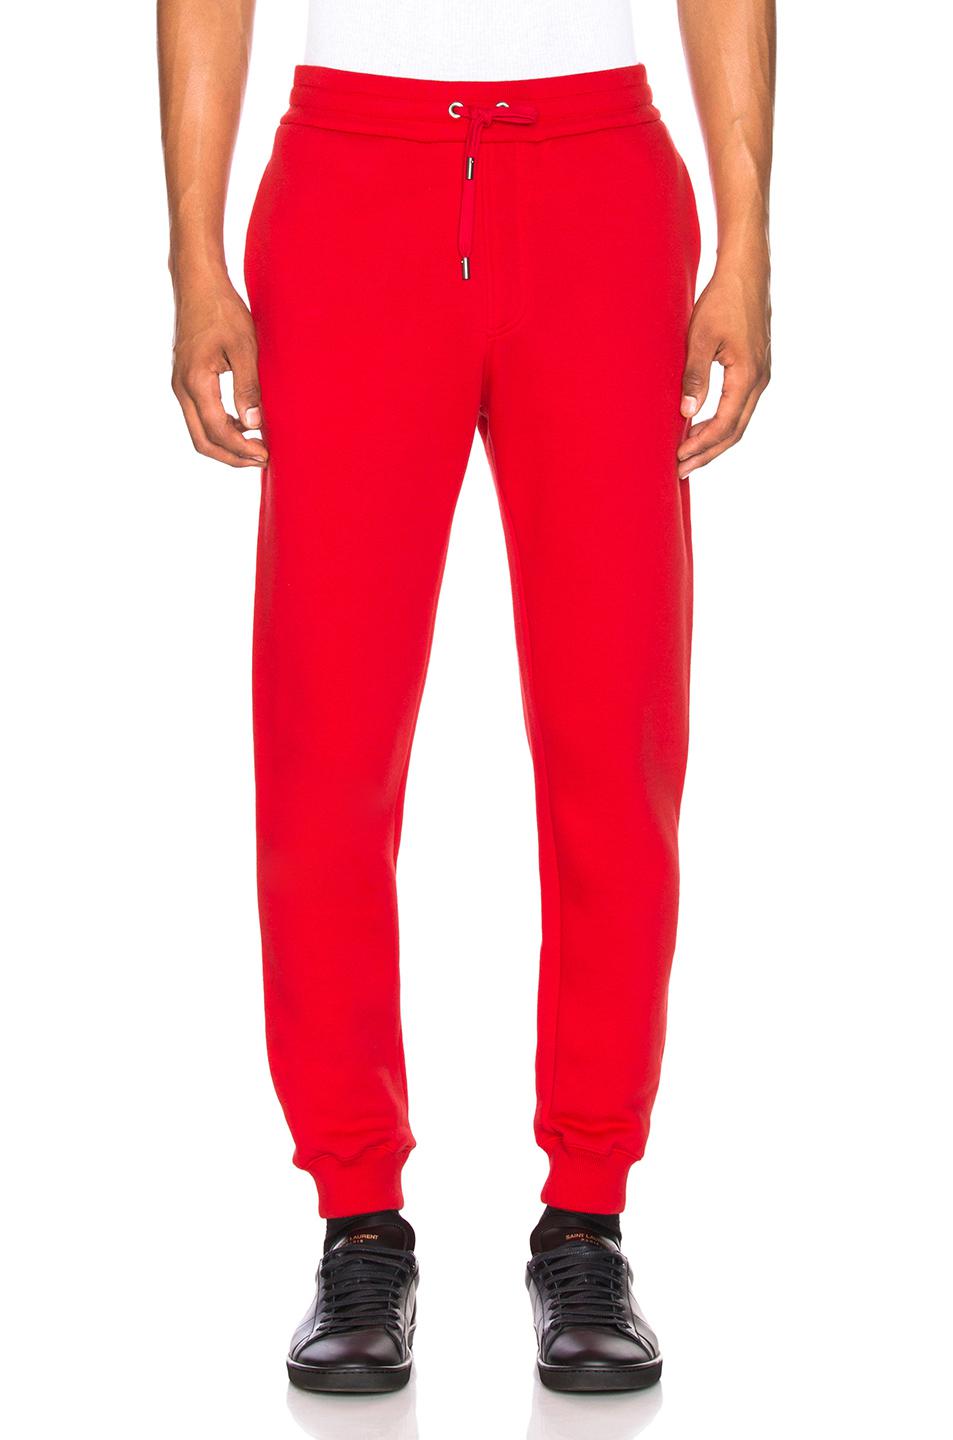 Versace Cotton Sweatpants in Red & Black (Red) for Men - Lyst